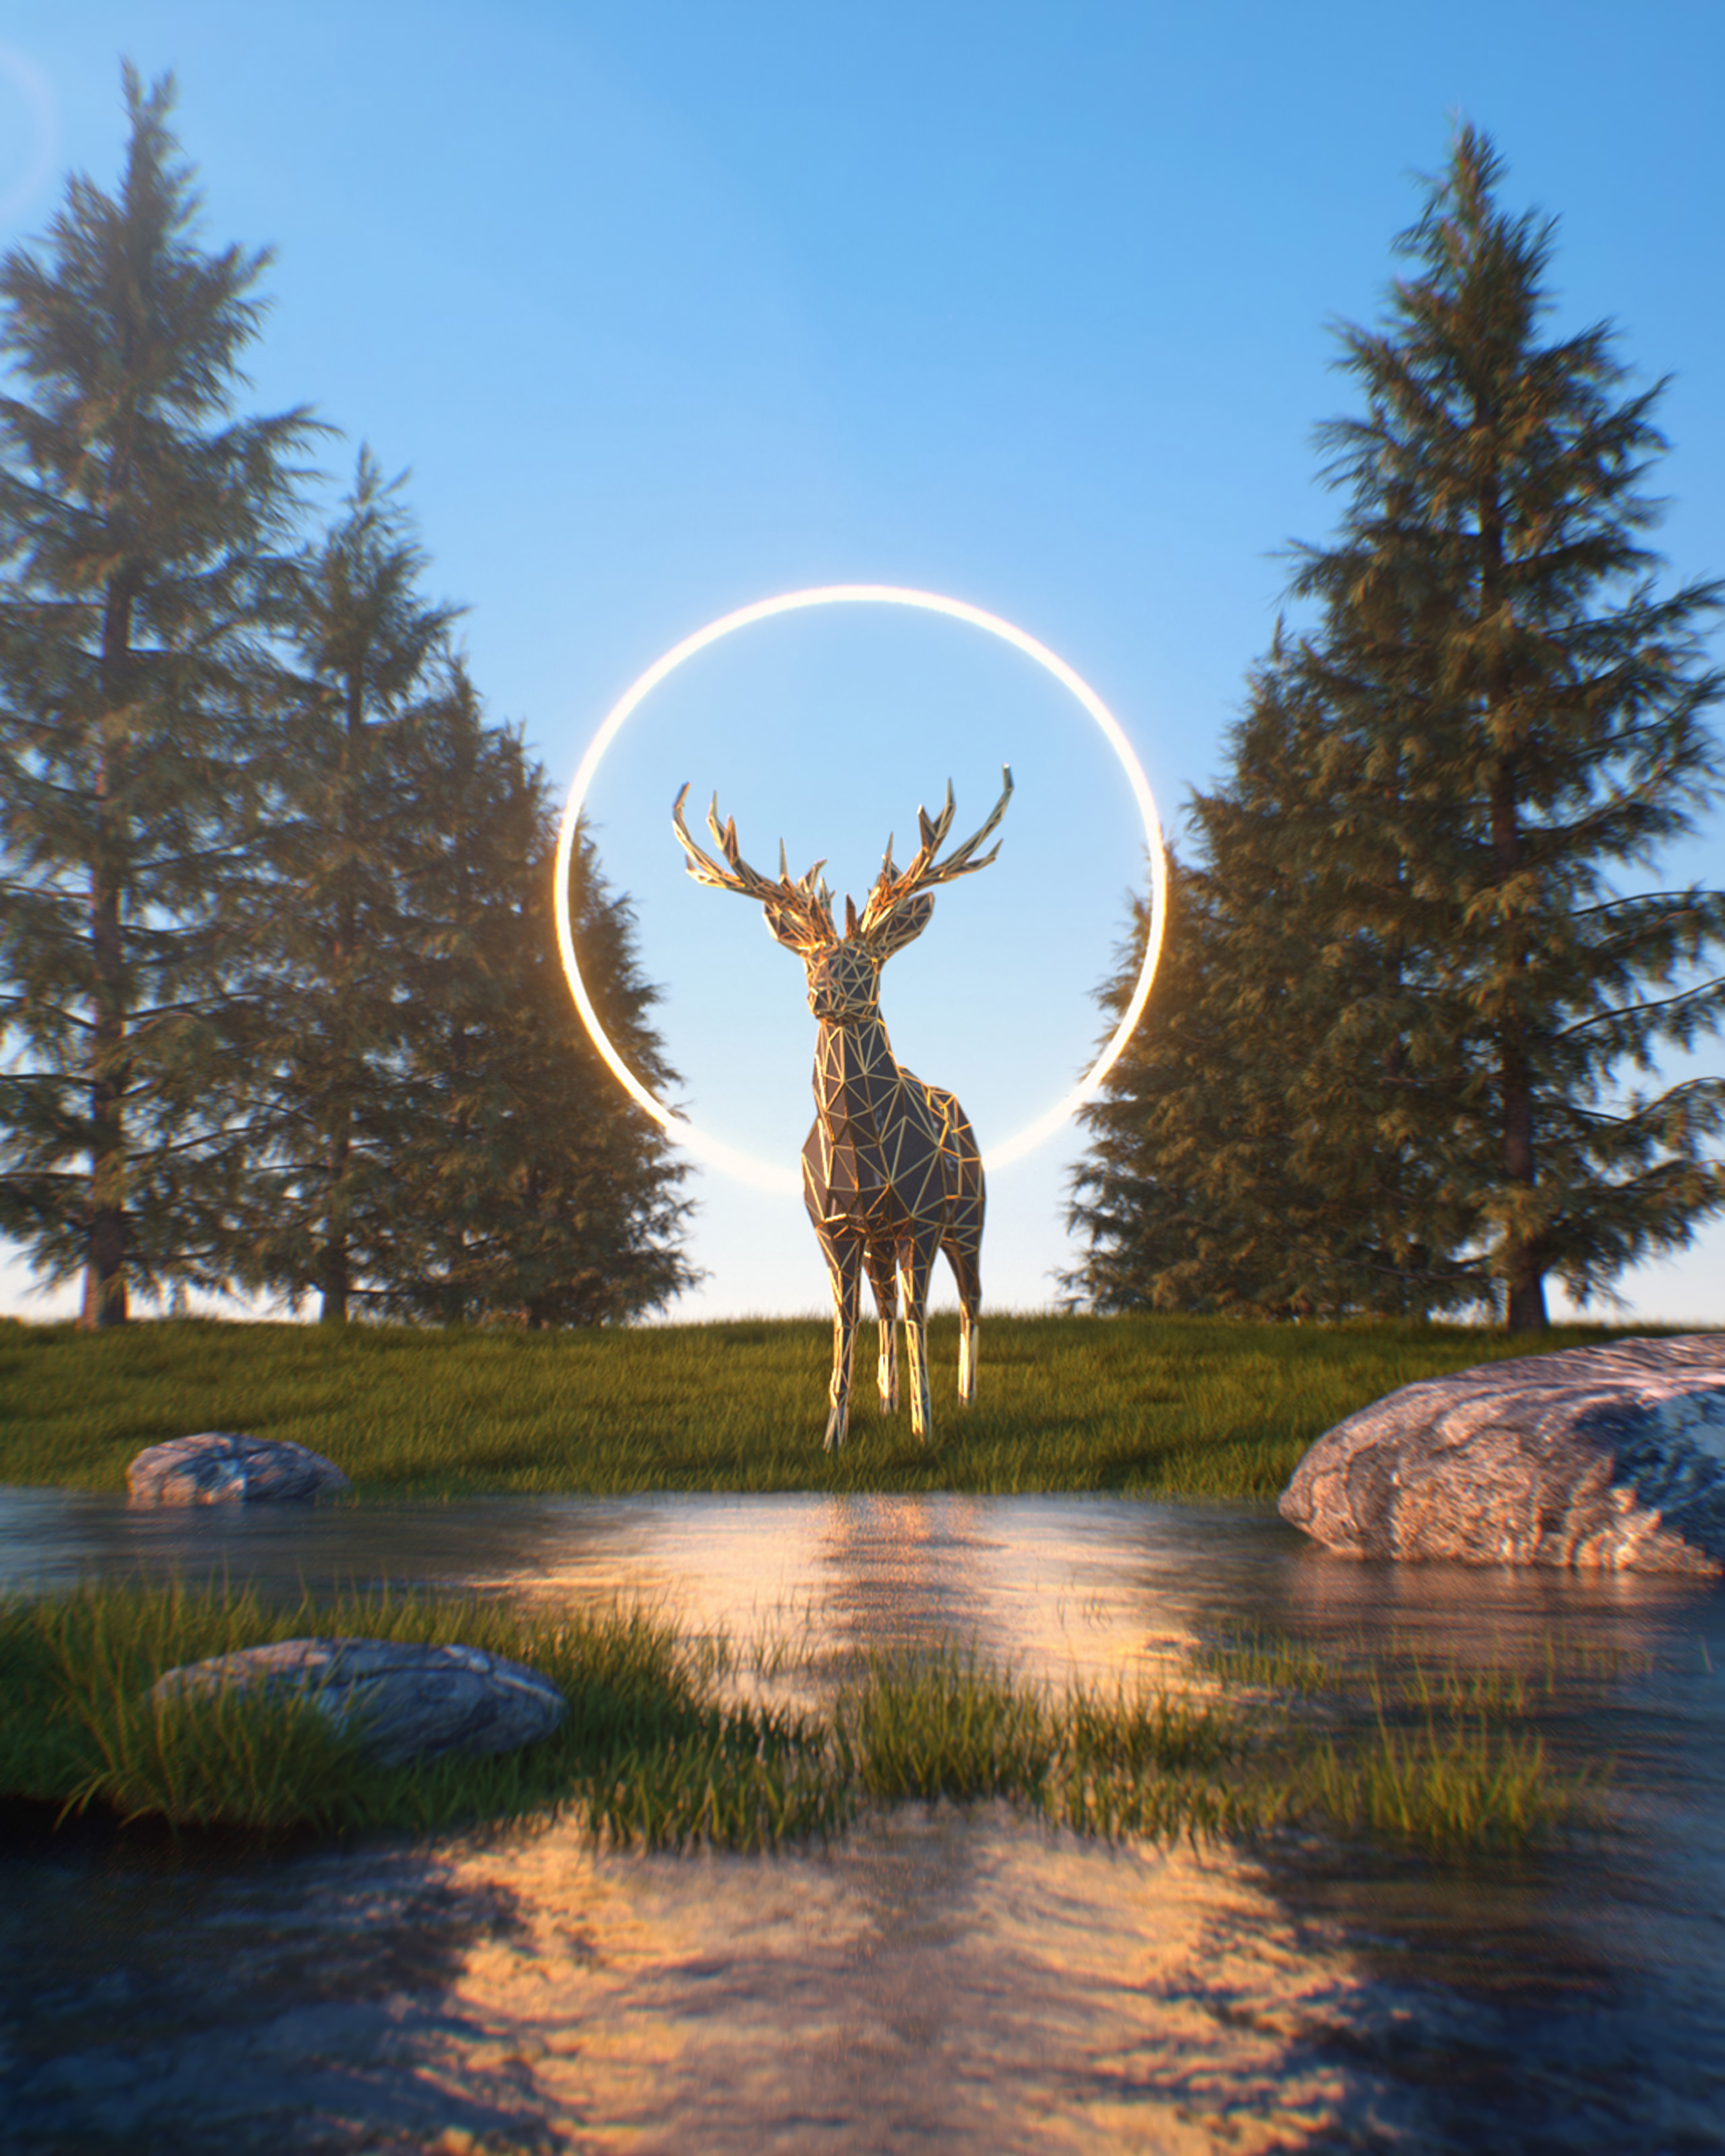 52818 download wallpaper 3d, nature, ring, figure, deer screensavers and pictures for free